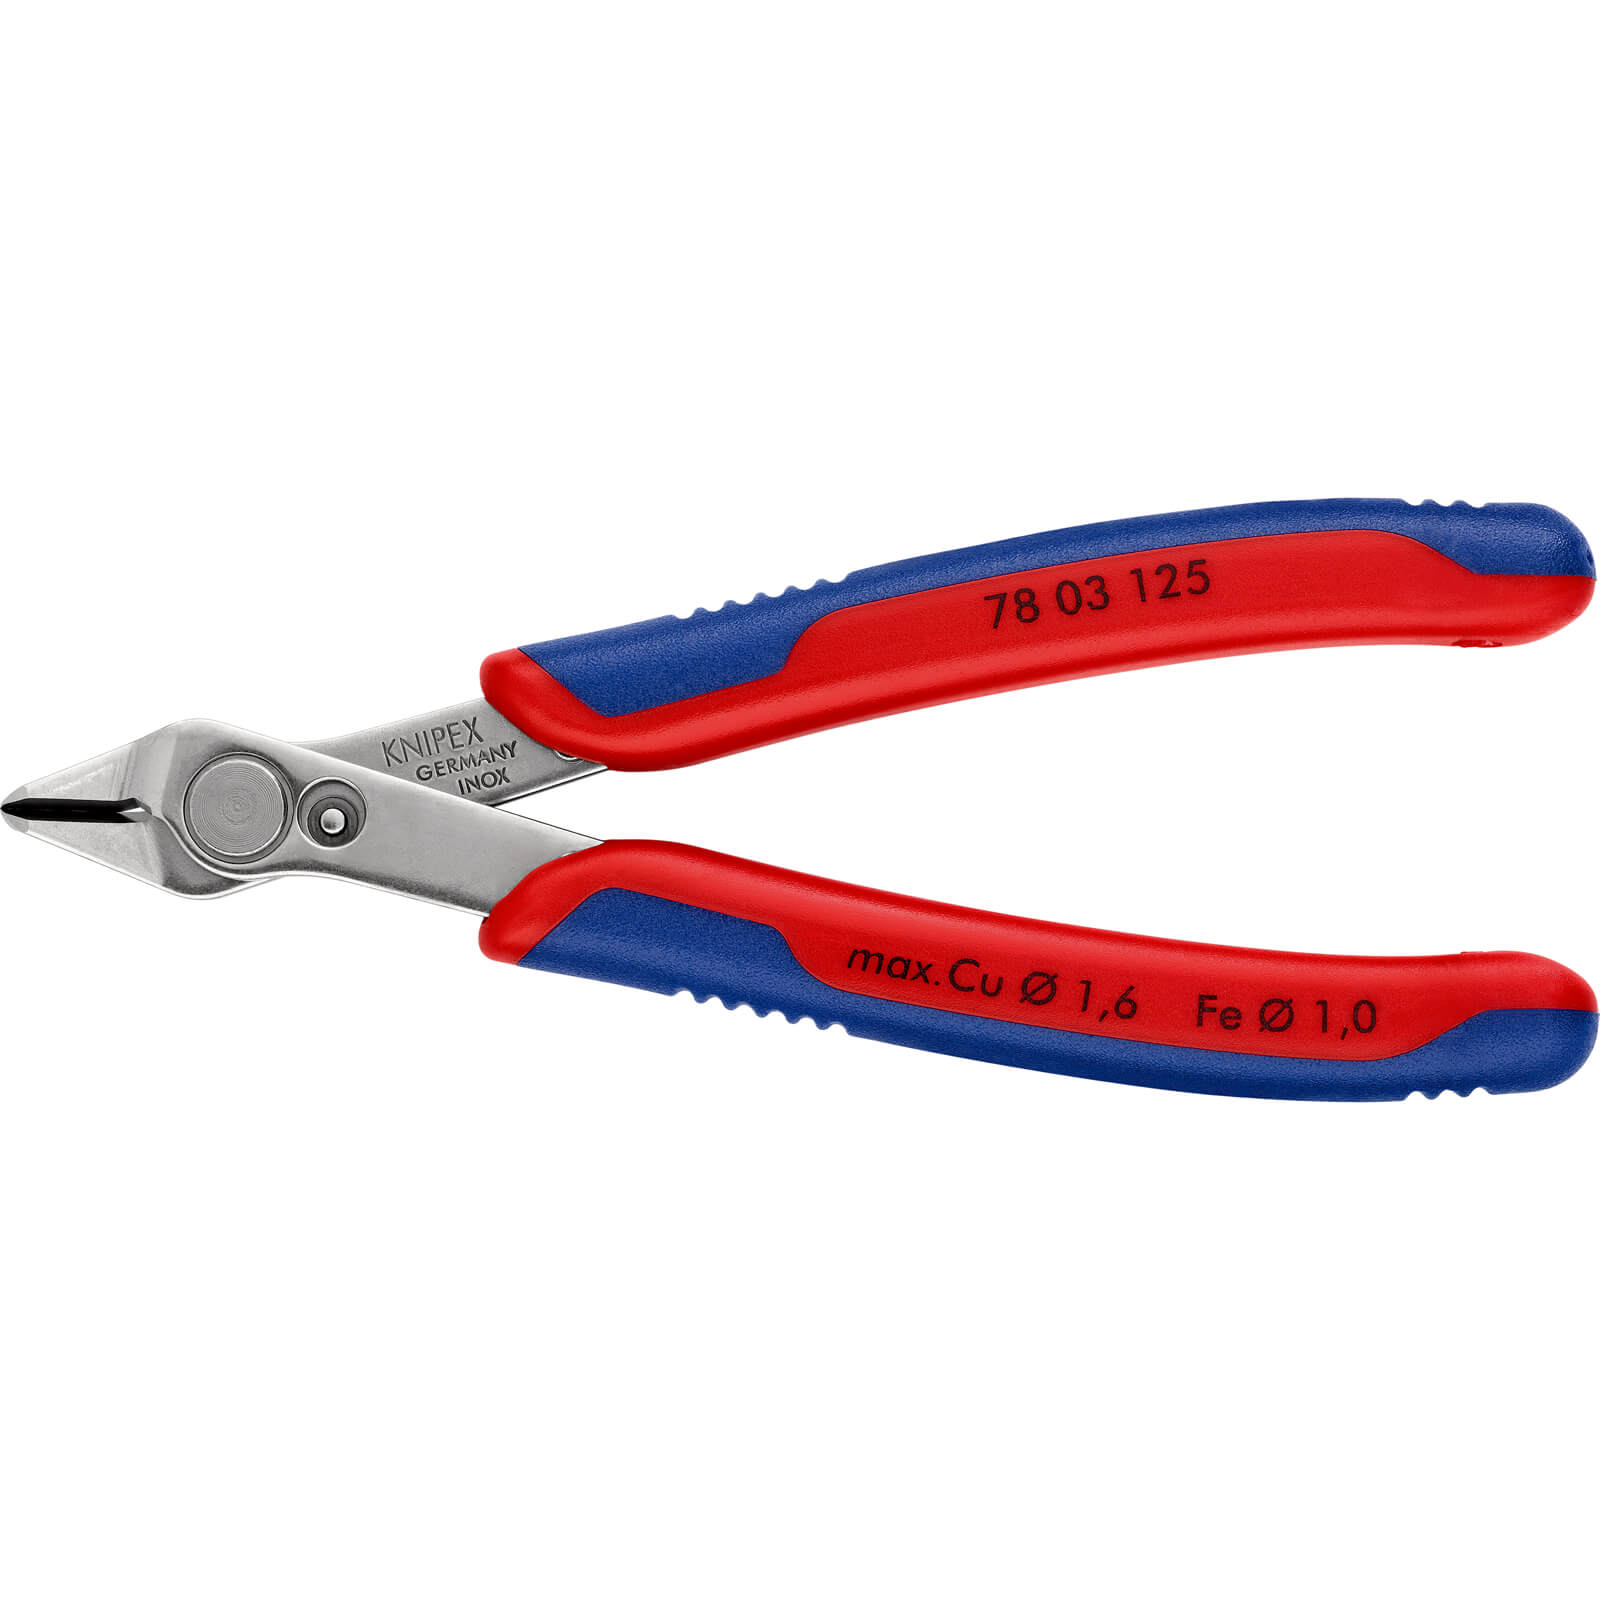 Image of Knipex 78 03 Electronic Precision Super Knips Wire Cutters 125mm